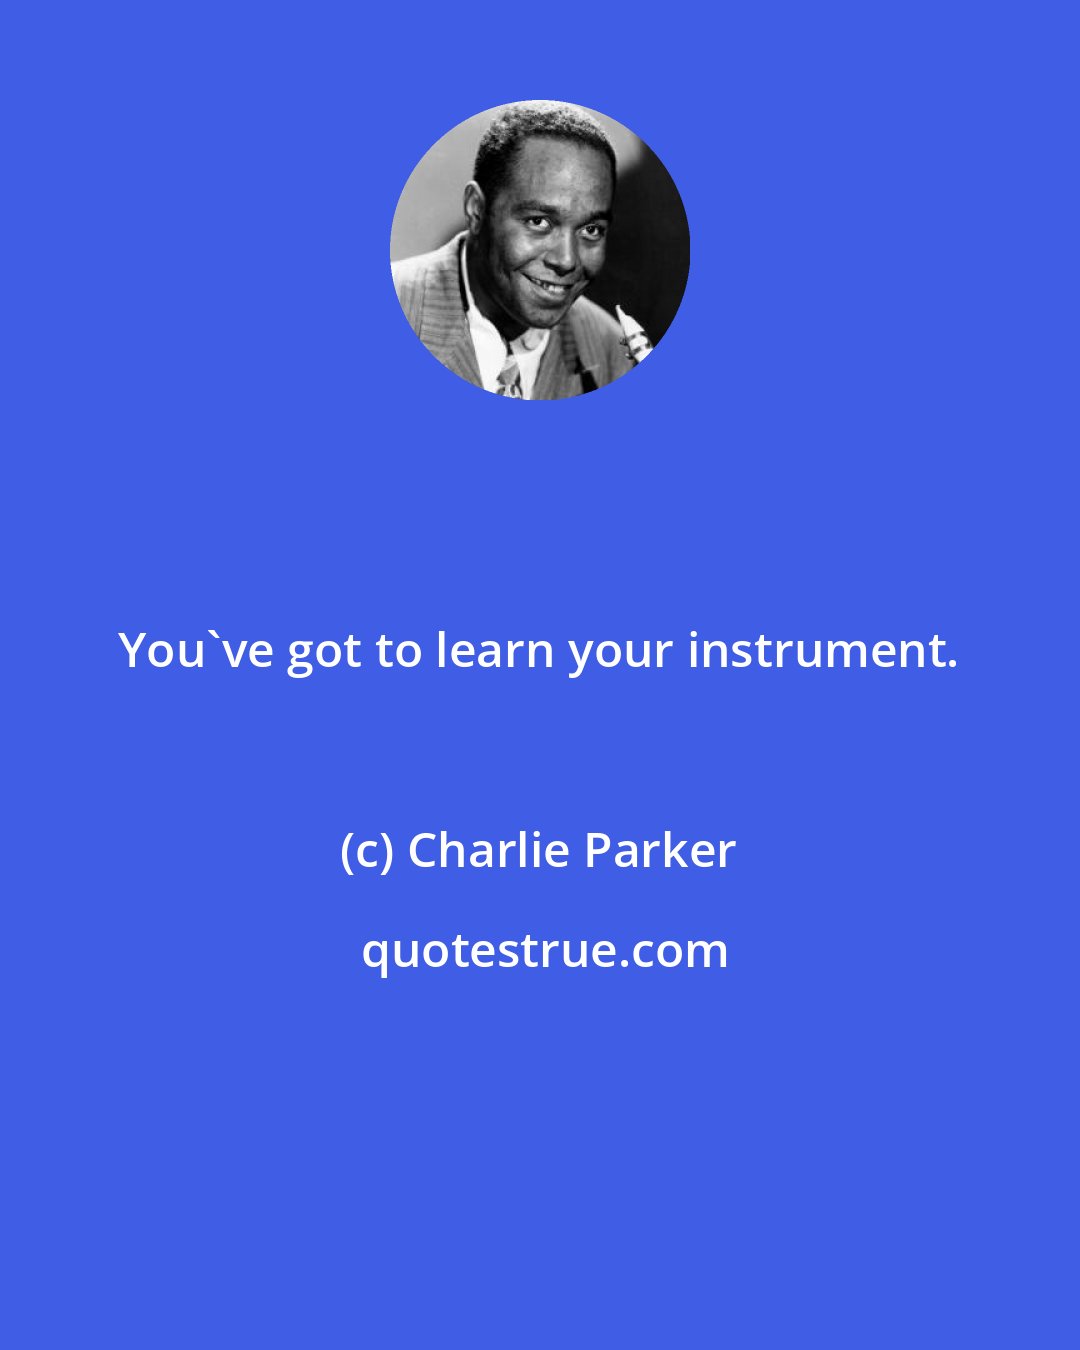 Charlie Parker: You've got to learn your instrument.